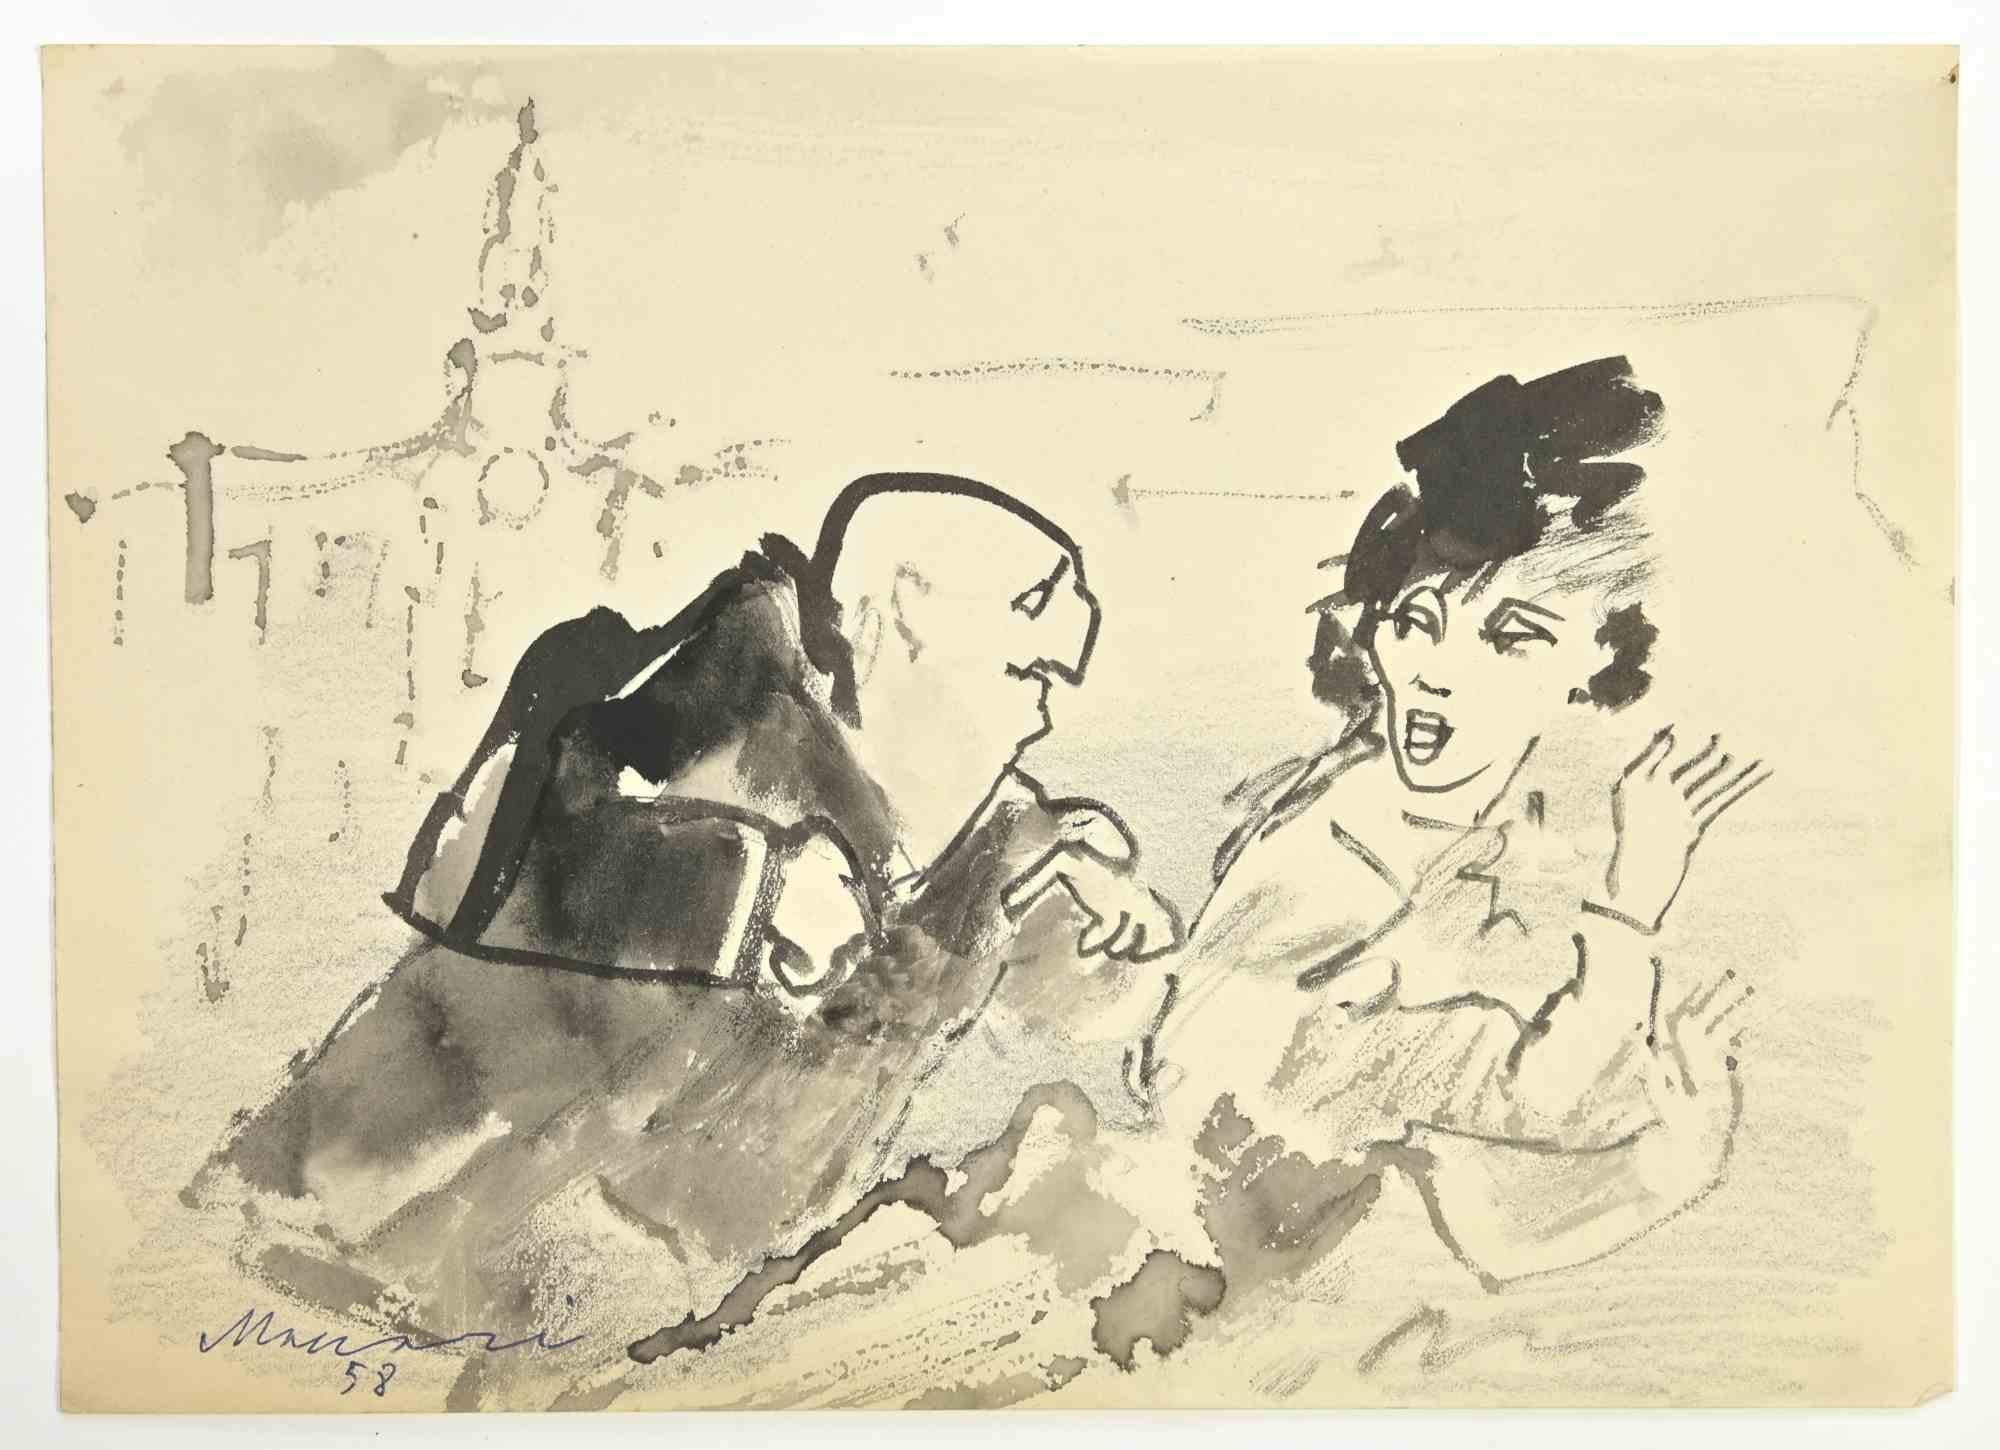 The Couple is a Watercolor Drawing realized by Mino Maccari  (1924-1989) in 1958.

Hand-signed on the lower.

Good conditions.

Mino Maccari (Siena, 1924-Rome, June 16, 1989) was an Italian writer, painter, engraver and journalist, winner of the